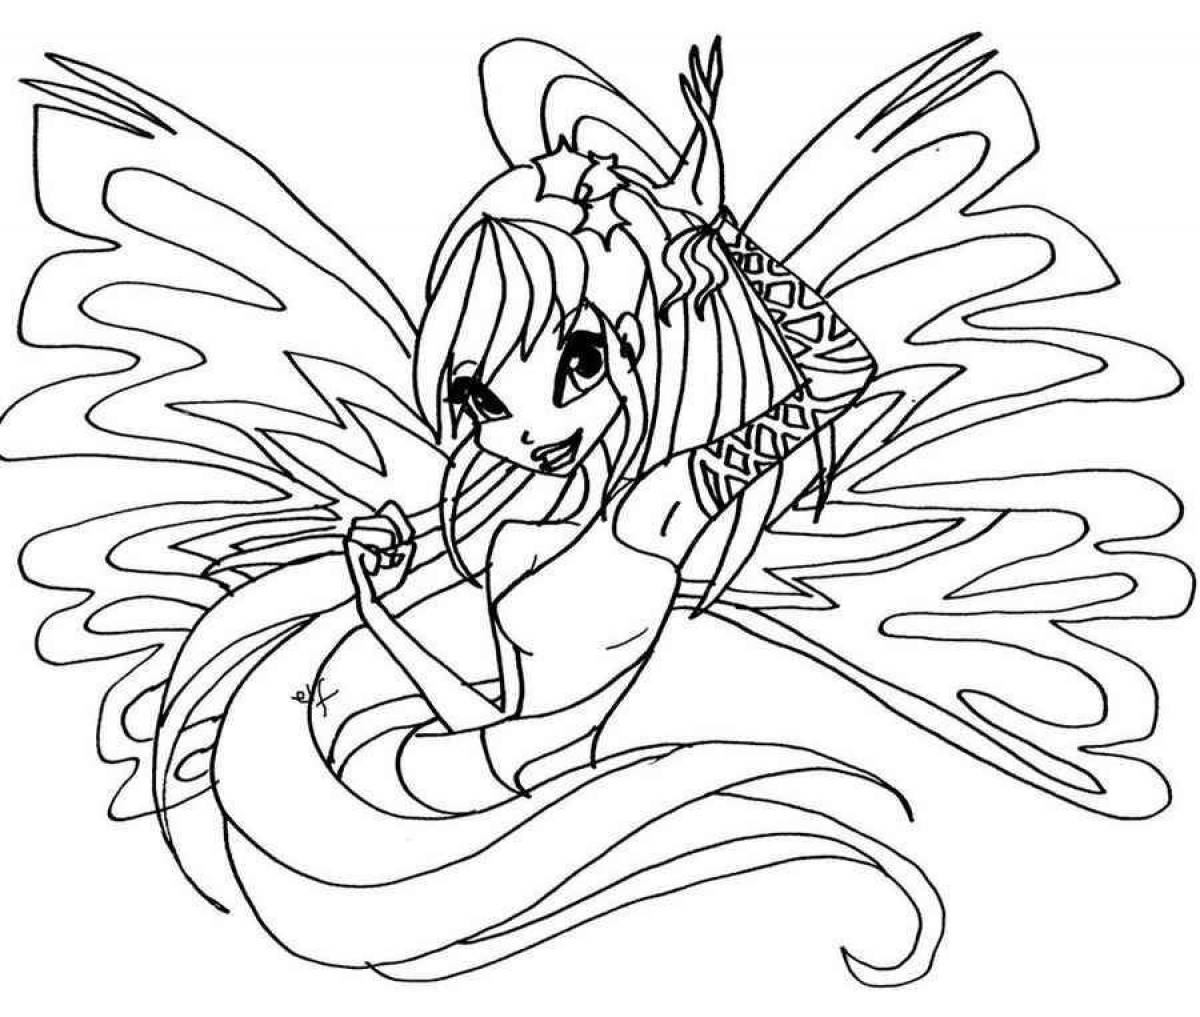 Amazing winx girls coloring pages